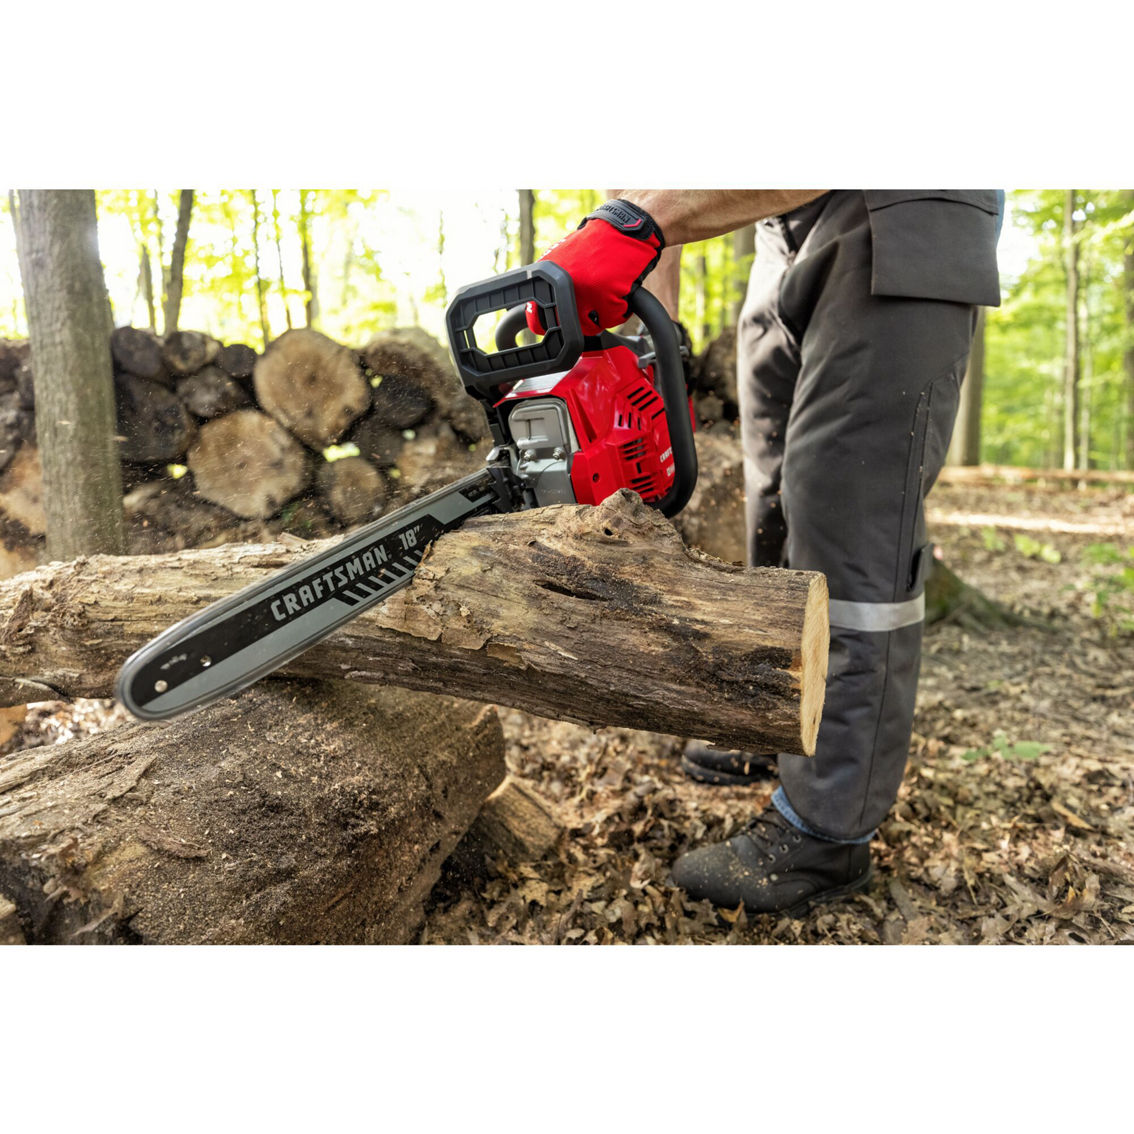 Craftsman 18 in. 42 cc 2-Cycle Gas Chainsaw - Image 6 of 6